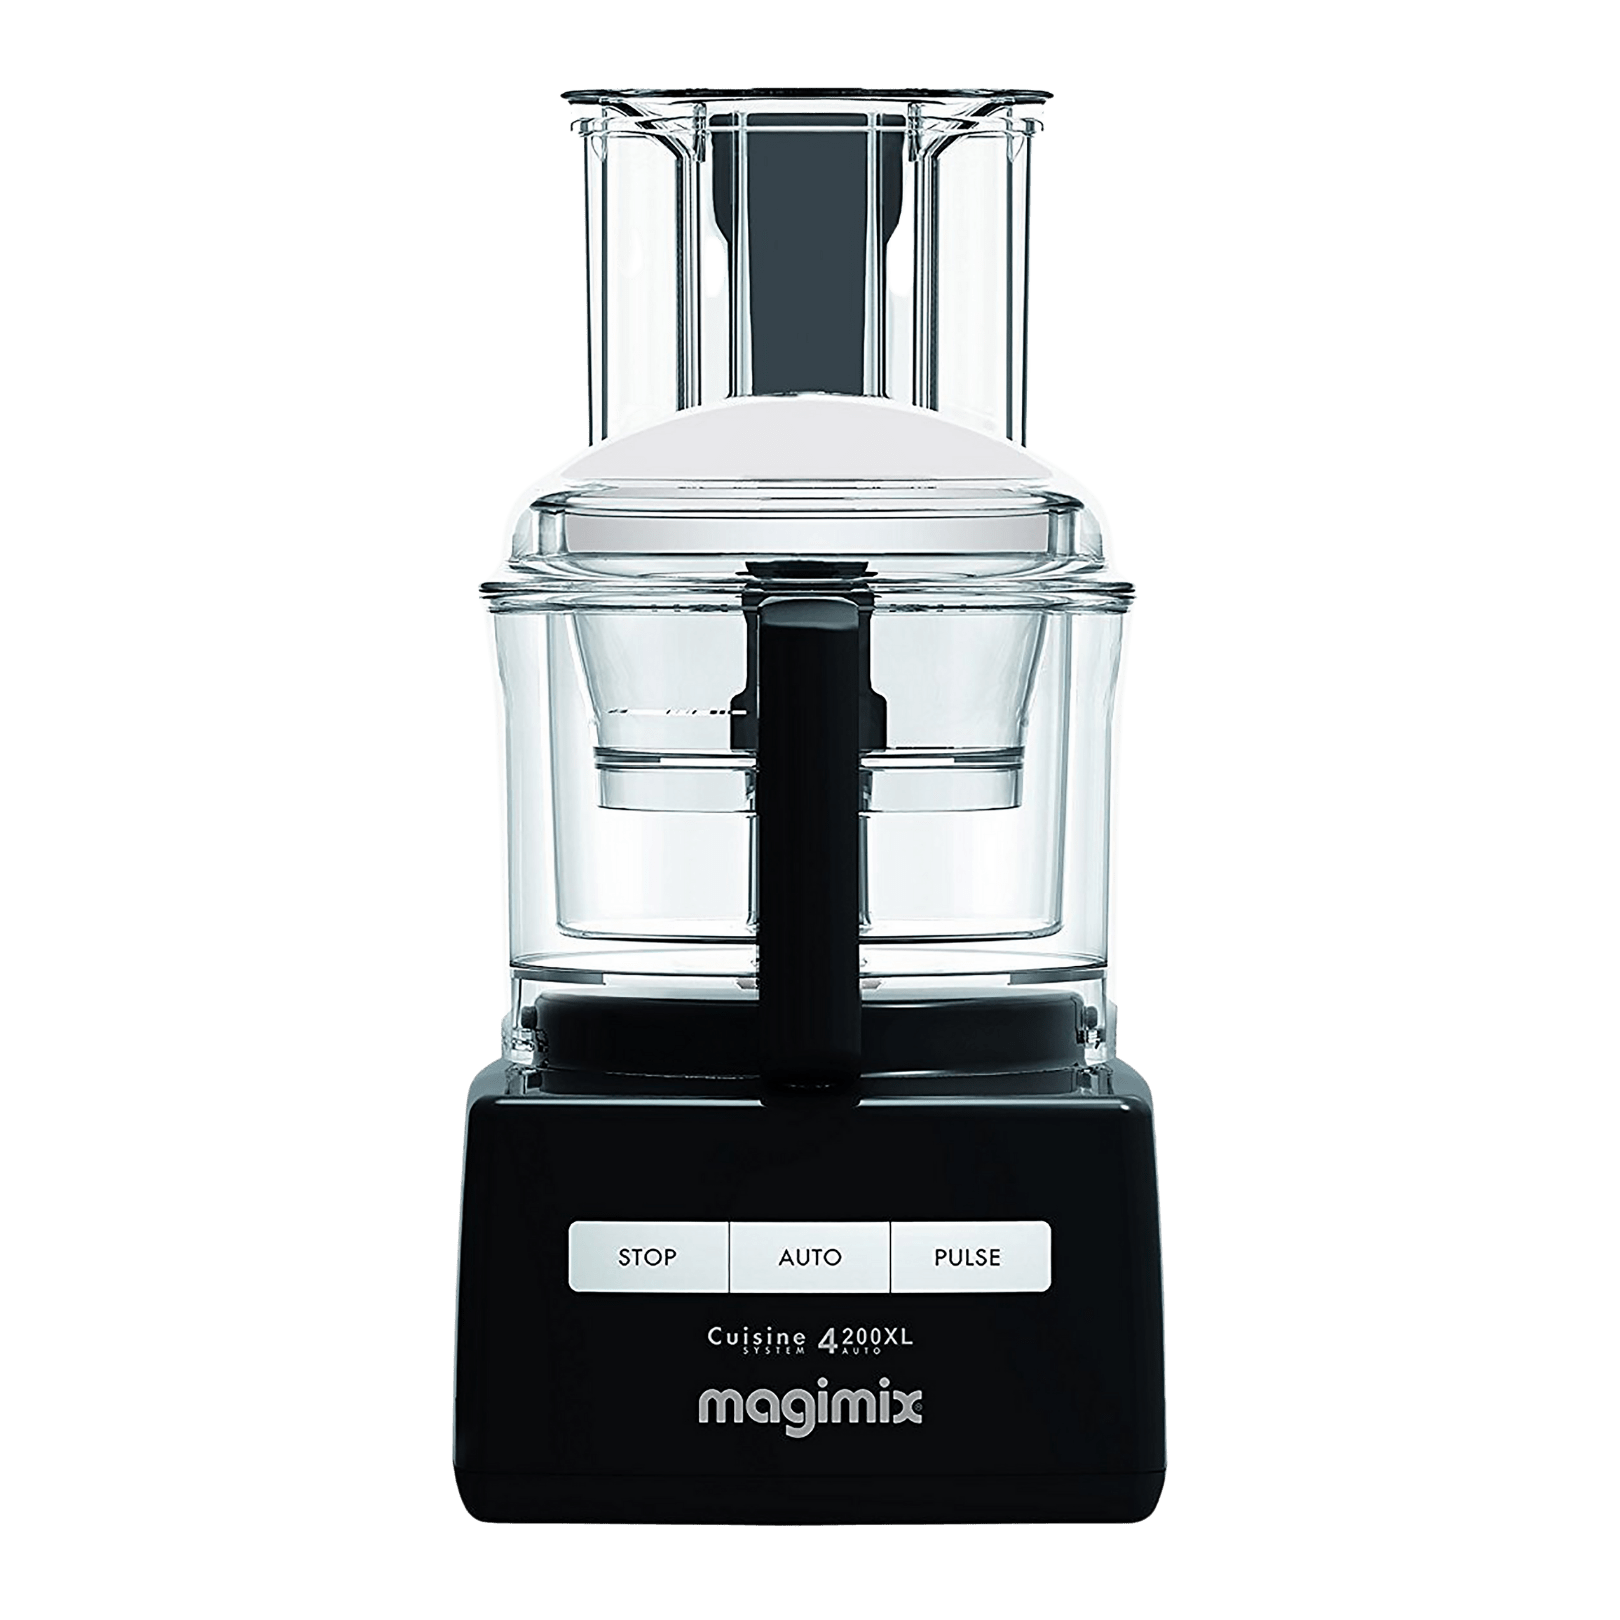 Magimix Food Processor CS4200XL & 14 Cup by Robot-Coupe Free Freight